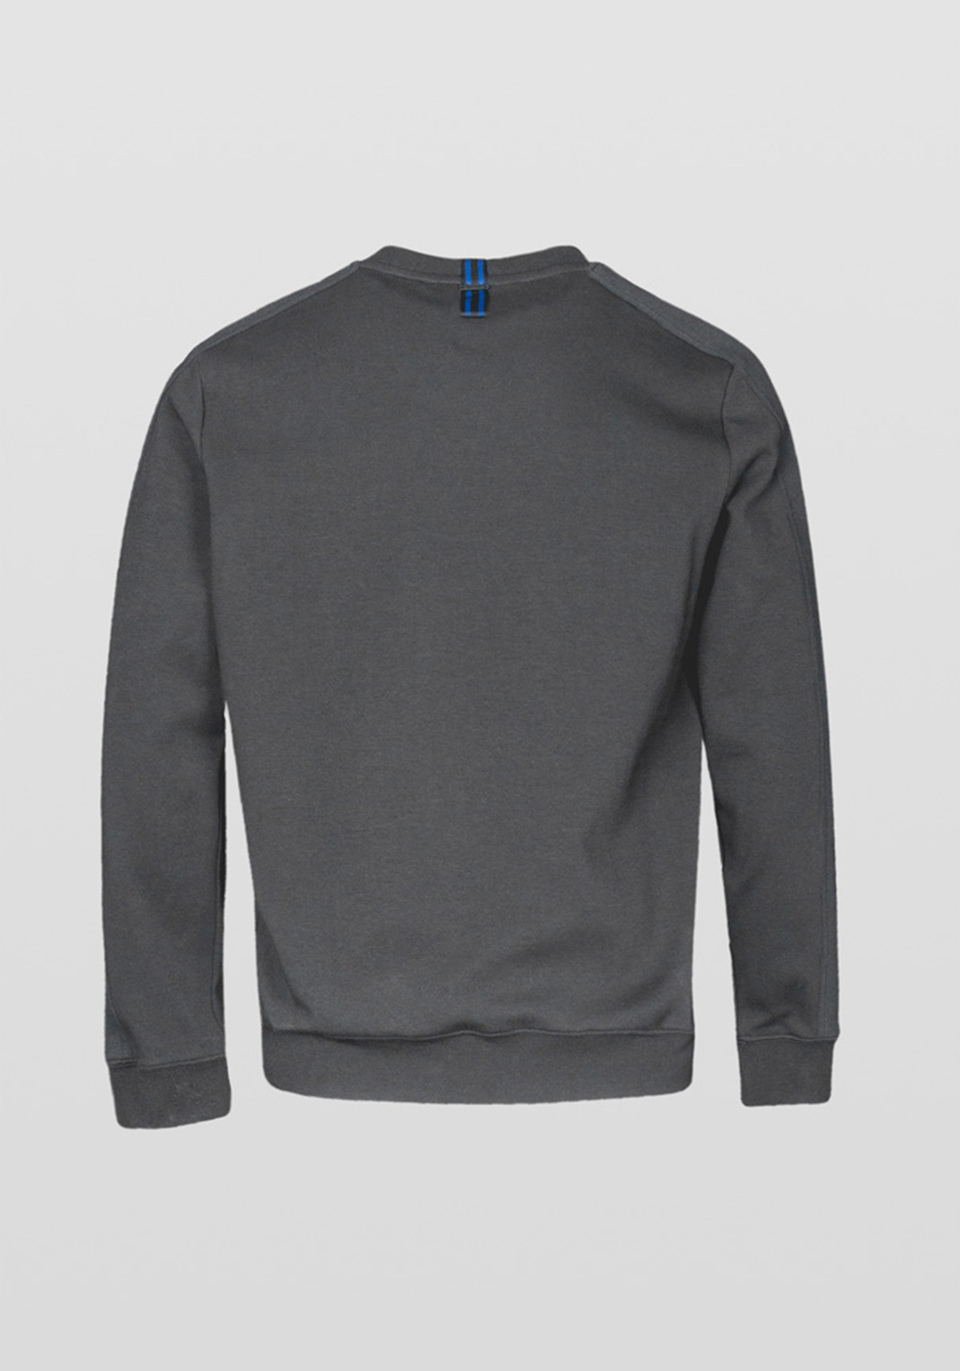 CREW-NECK REGULAR-FIT SWEATSHIRT IN A SOFT FABRIC WITH A LOGO DETAIL - Antony Morato Online Shop